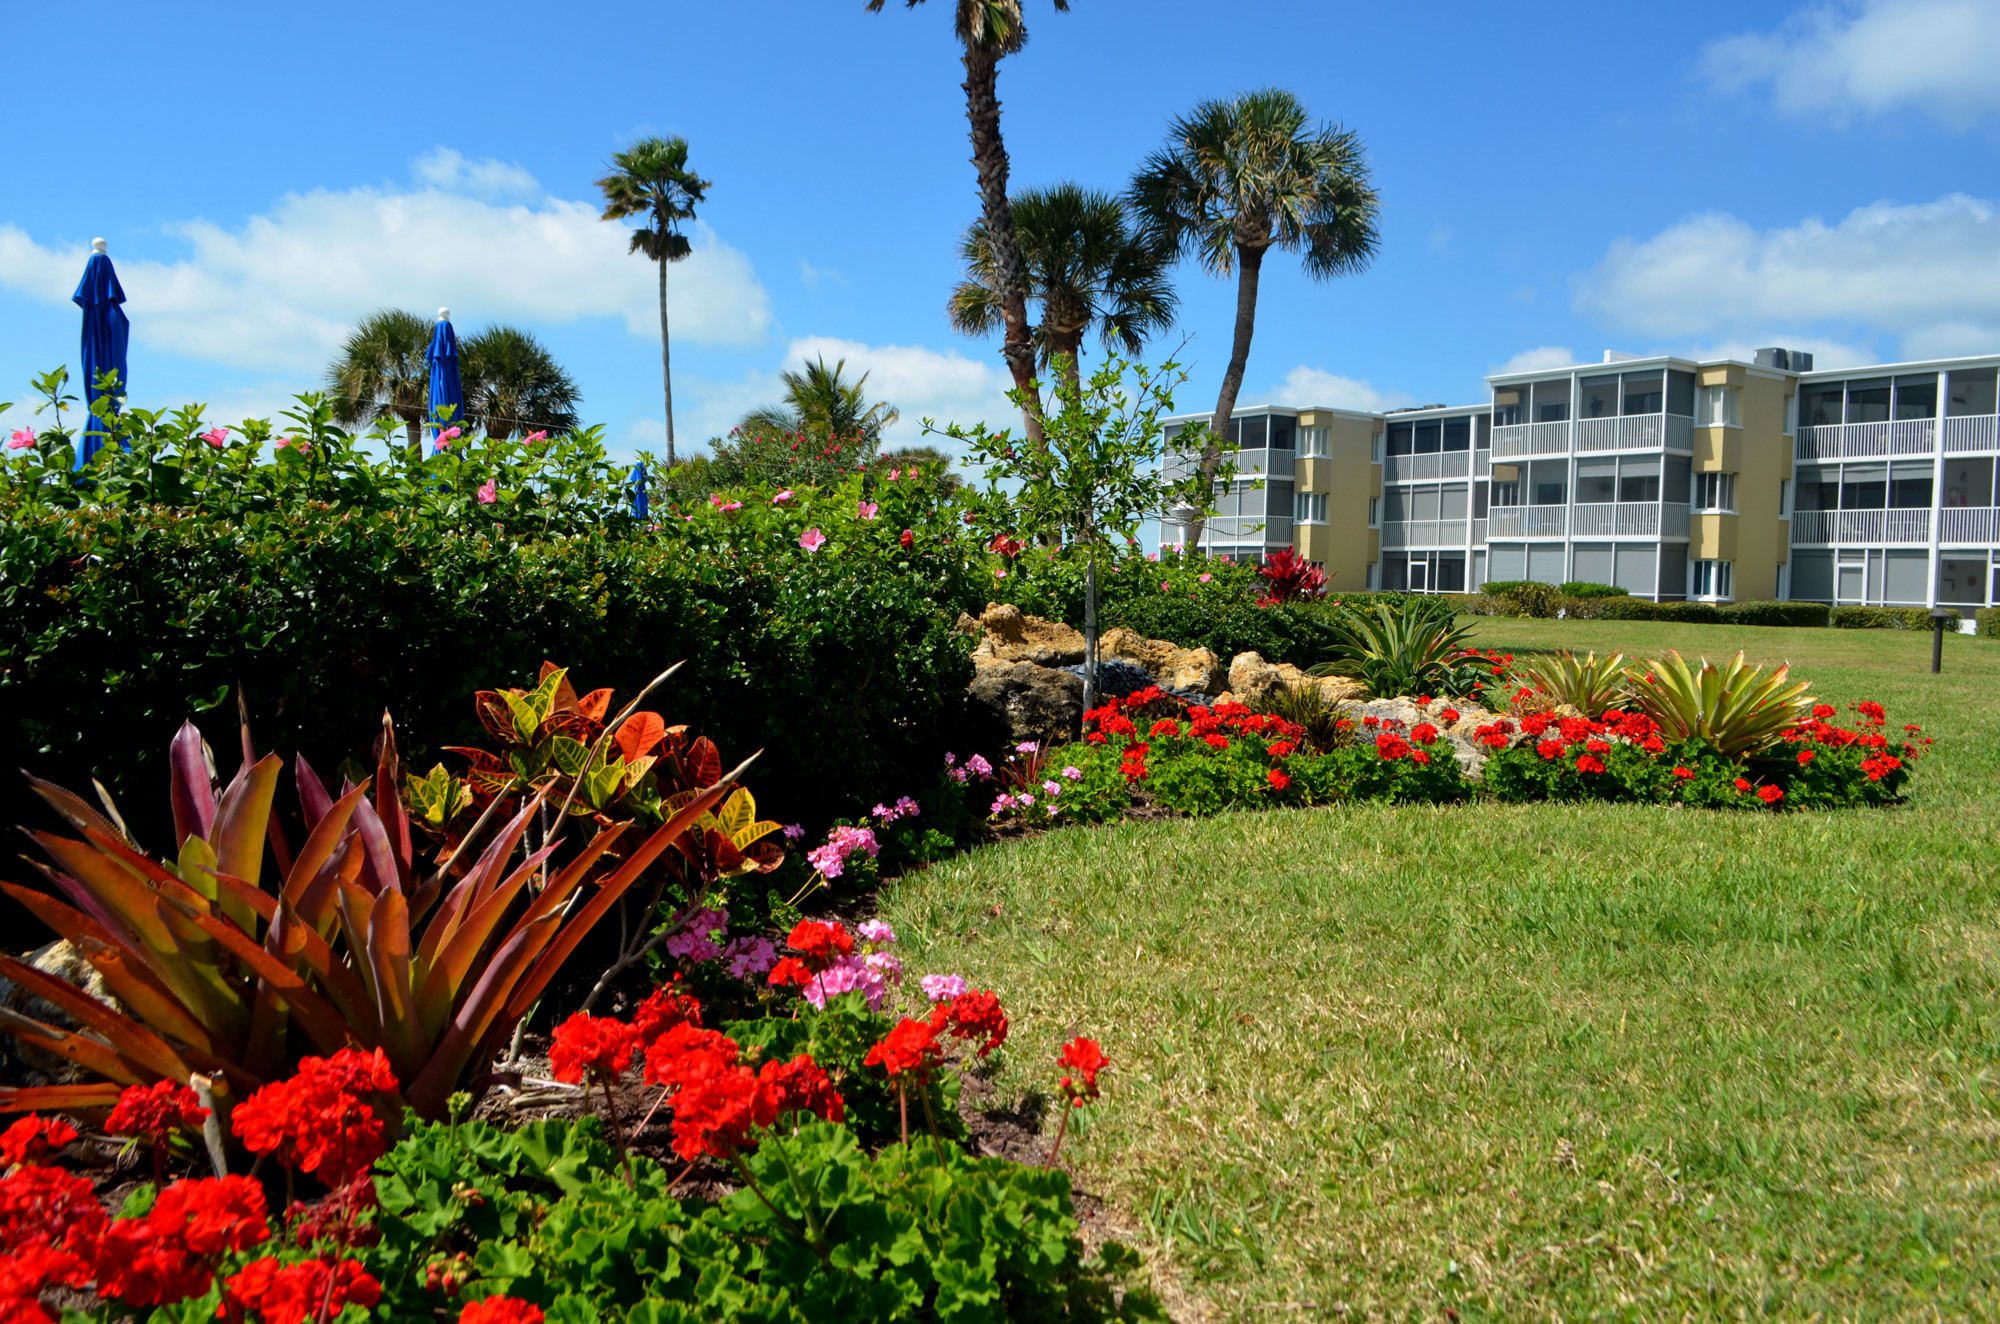 When walking to the pool deck, residents are greeted with tropical colors and plants. 